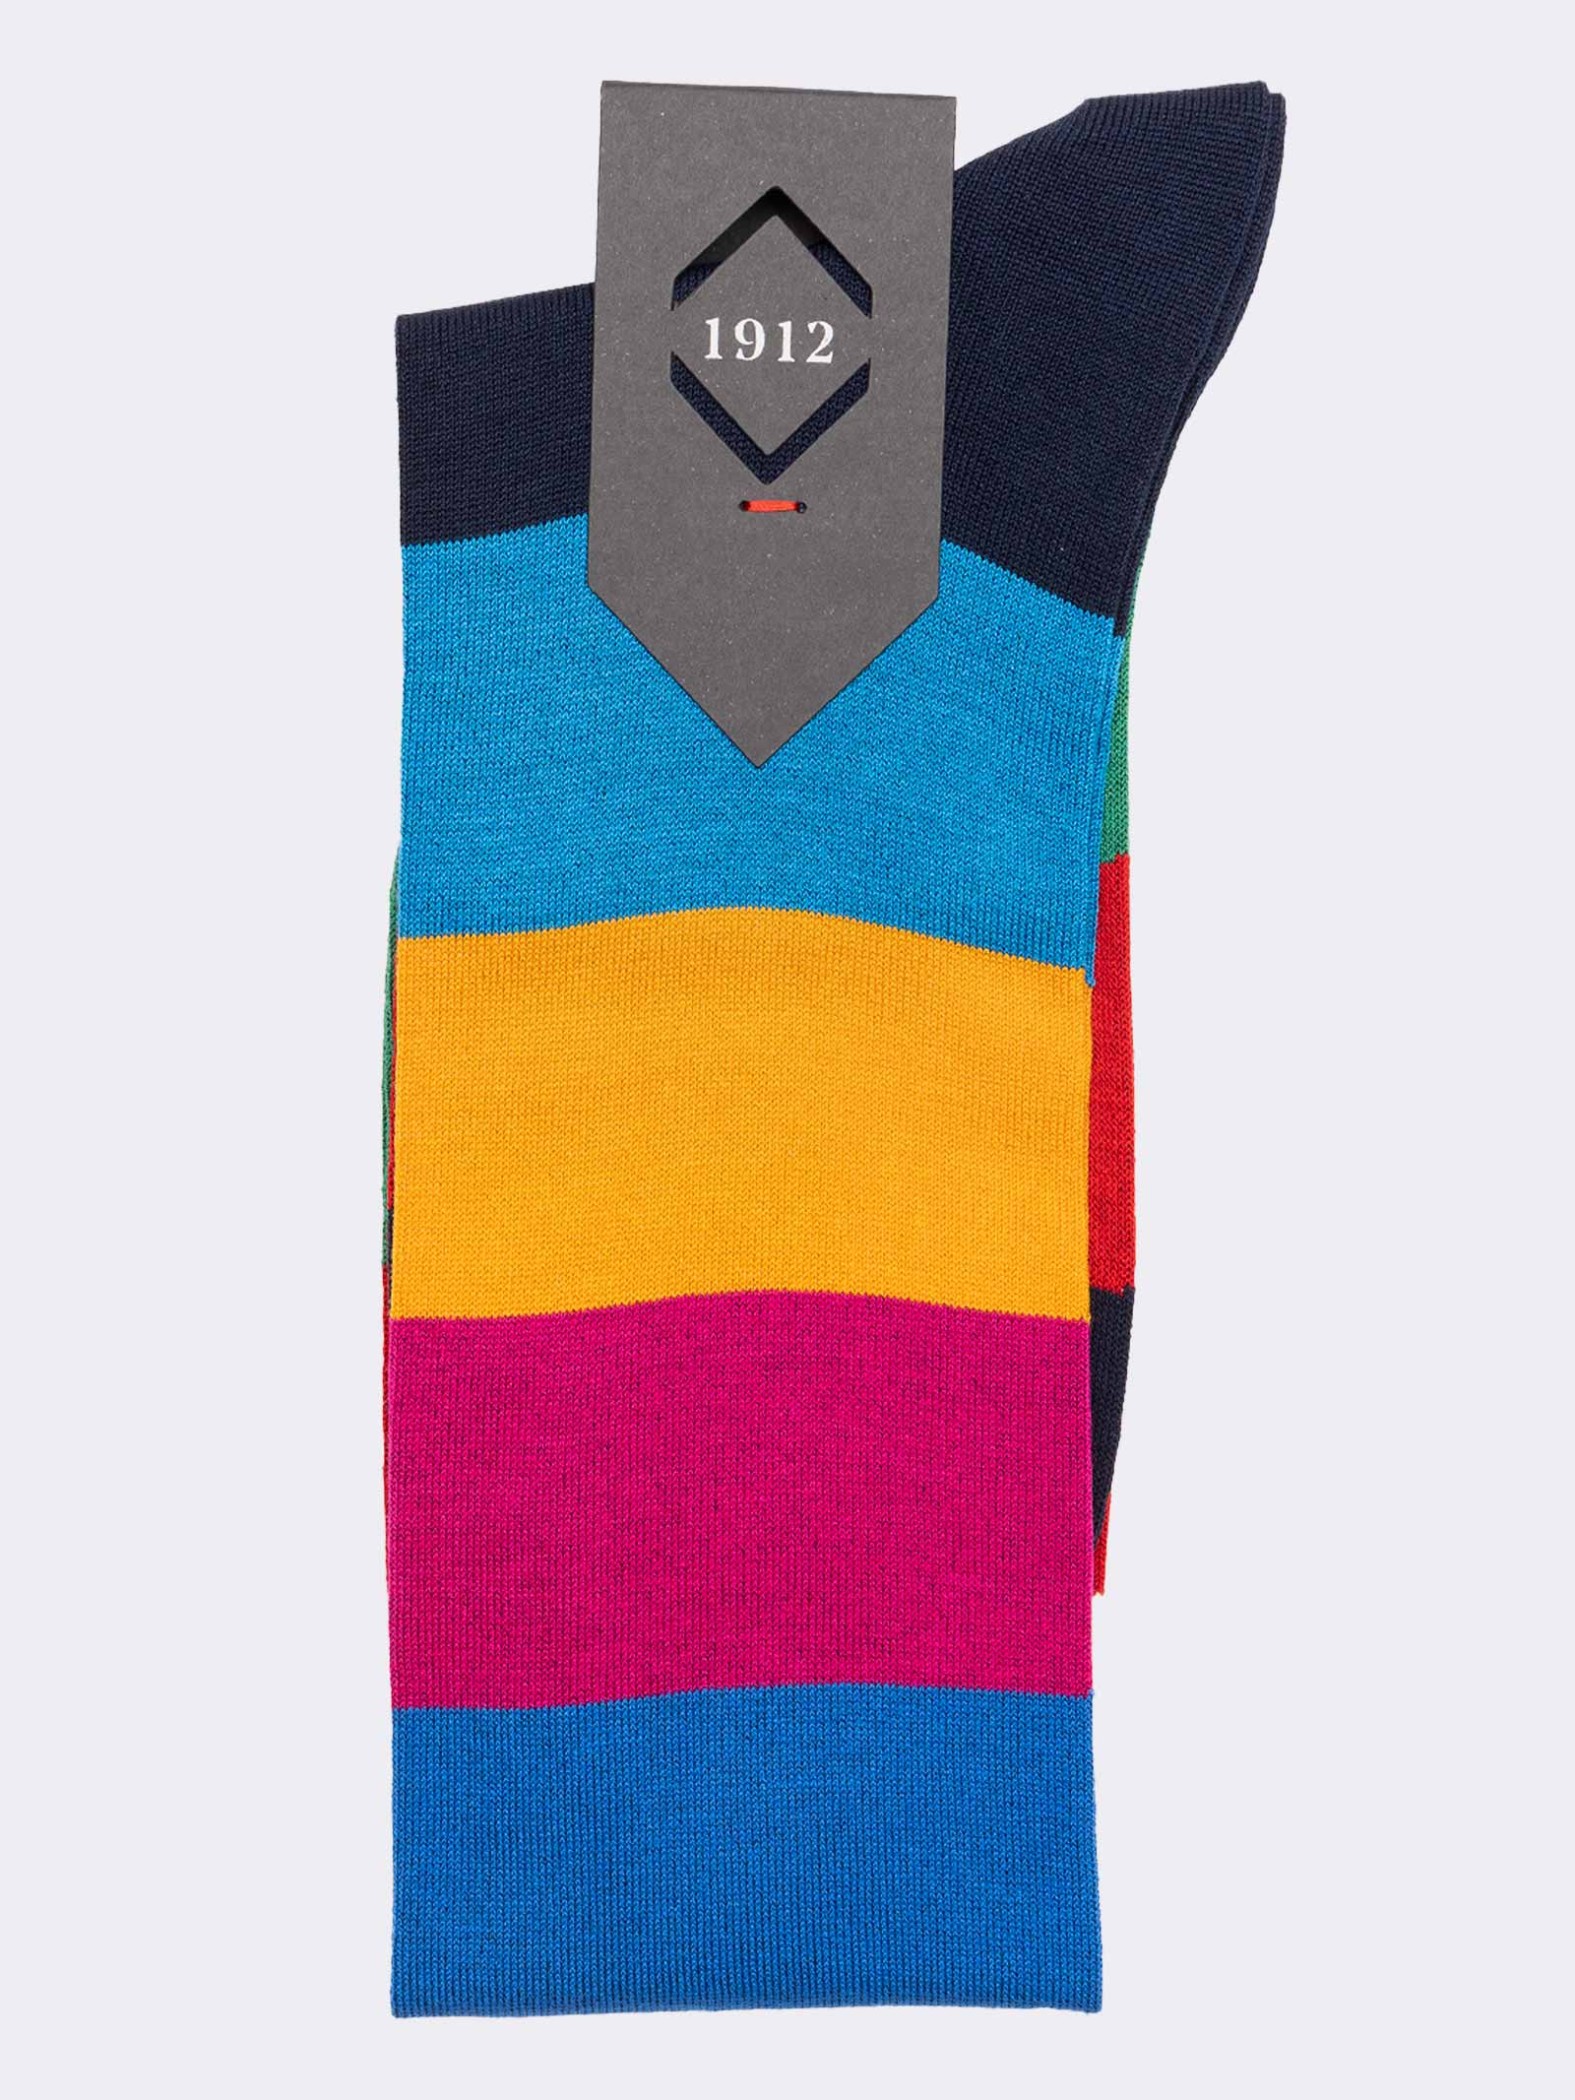 Multicoloured band patterned men's knee-high socks in fresh Cotton - Made in Italy